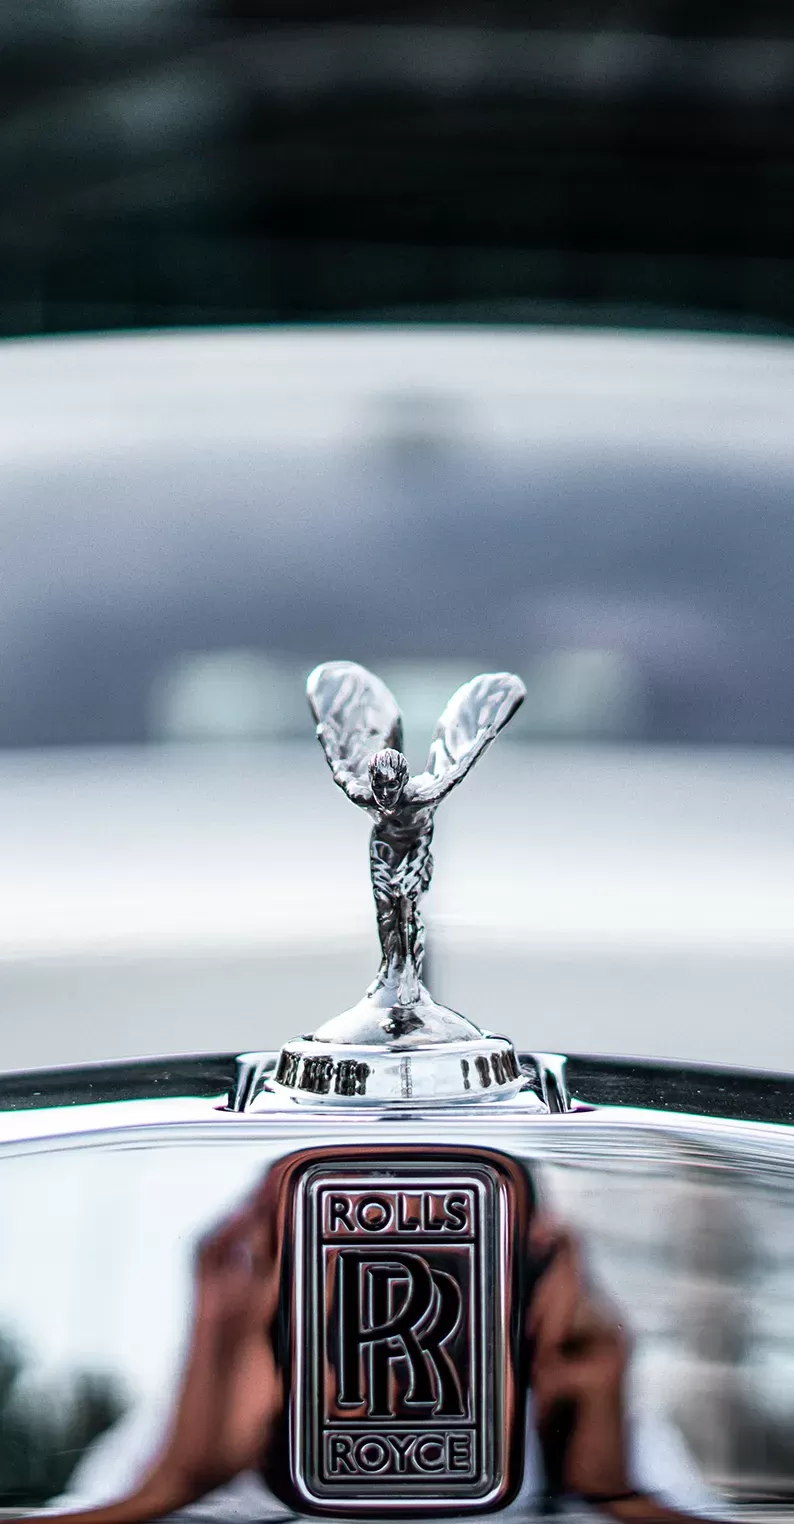 Front of silver Rolls Royce car with branded bonnet ornament